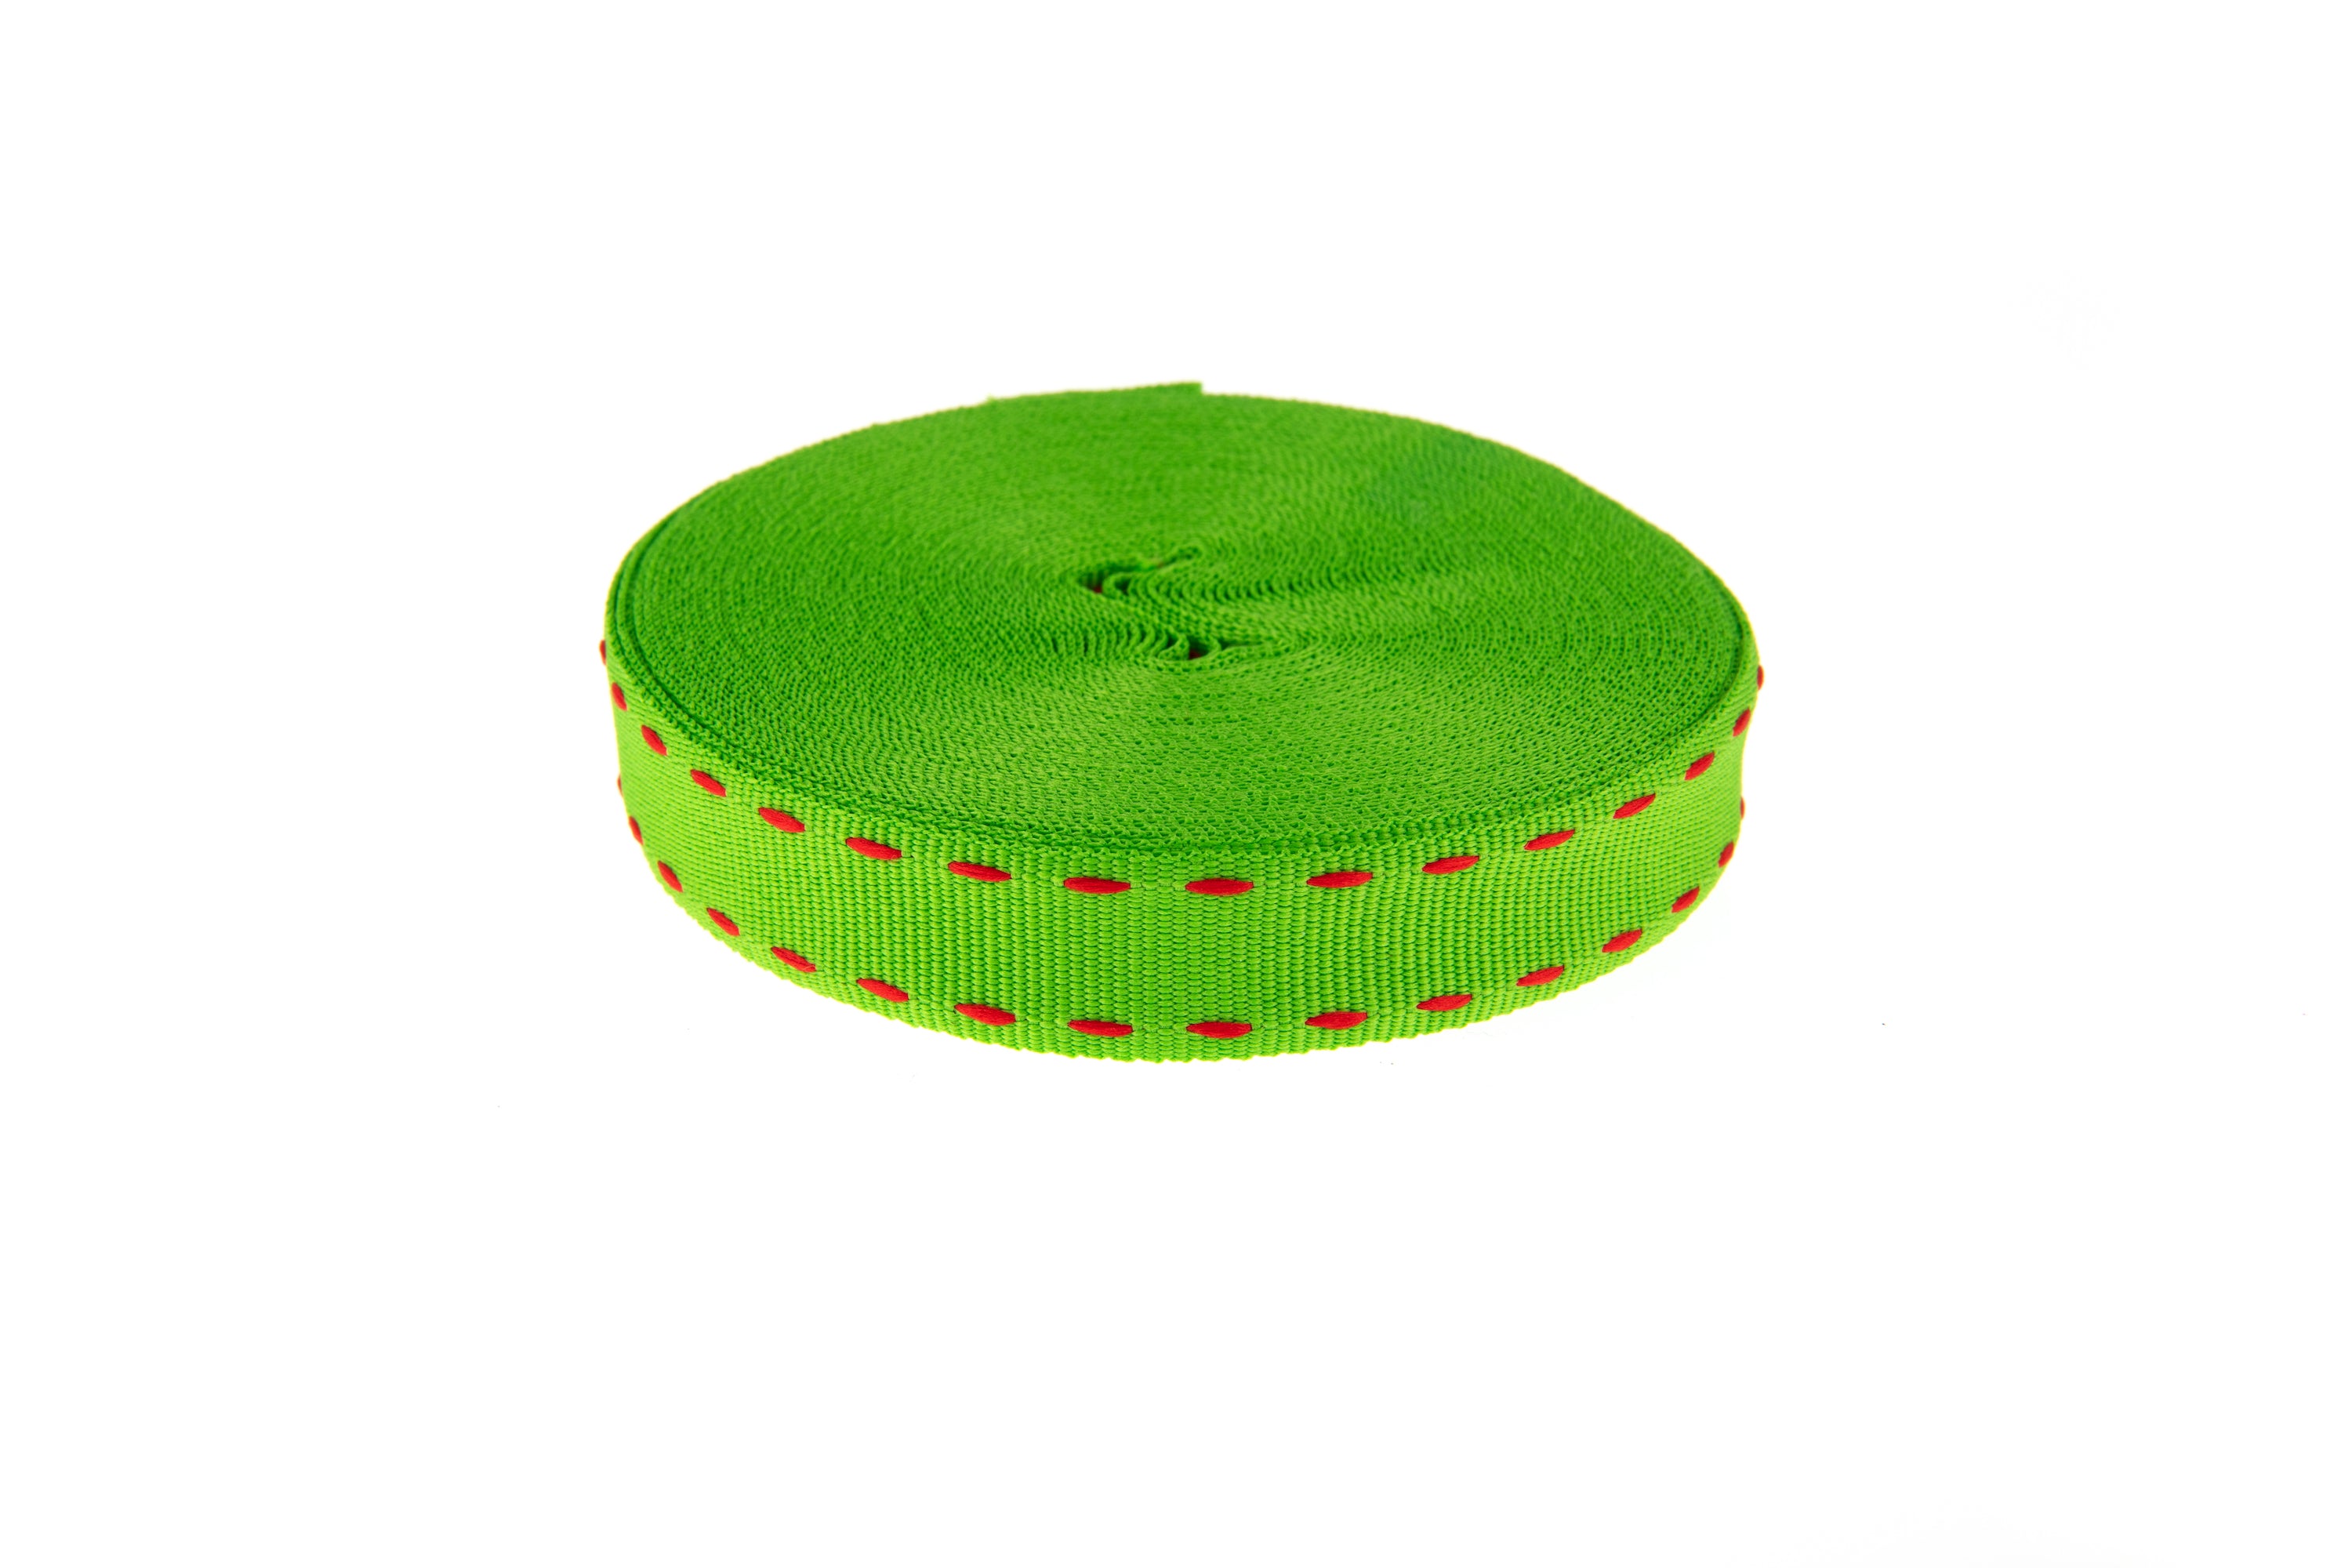 LIME GREEN GLITTER PAINTED ON JUTE RIBBON 4x10yd DCR2A61LM40 – Jam